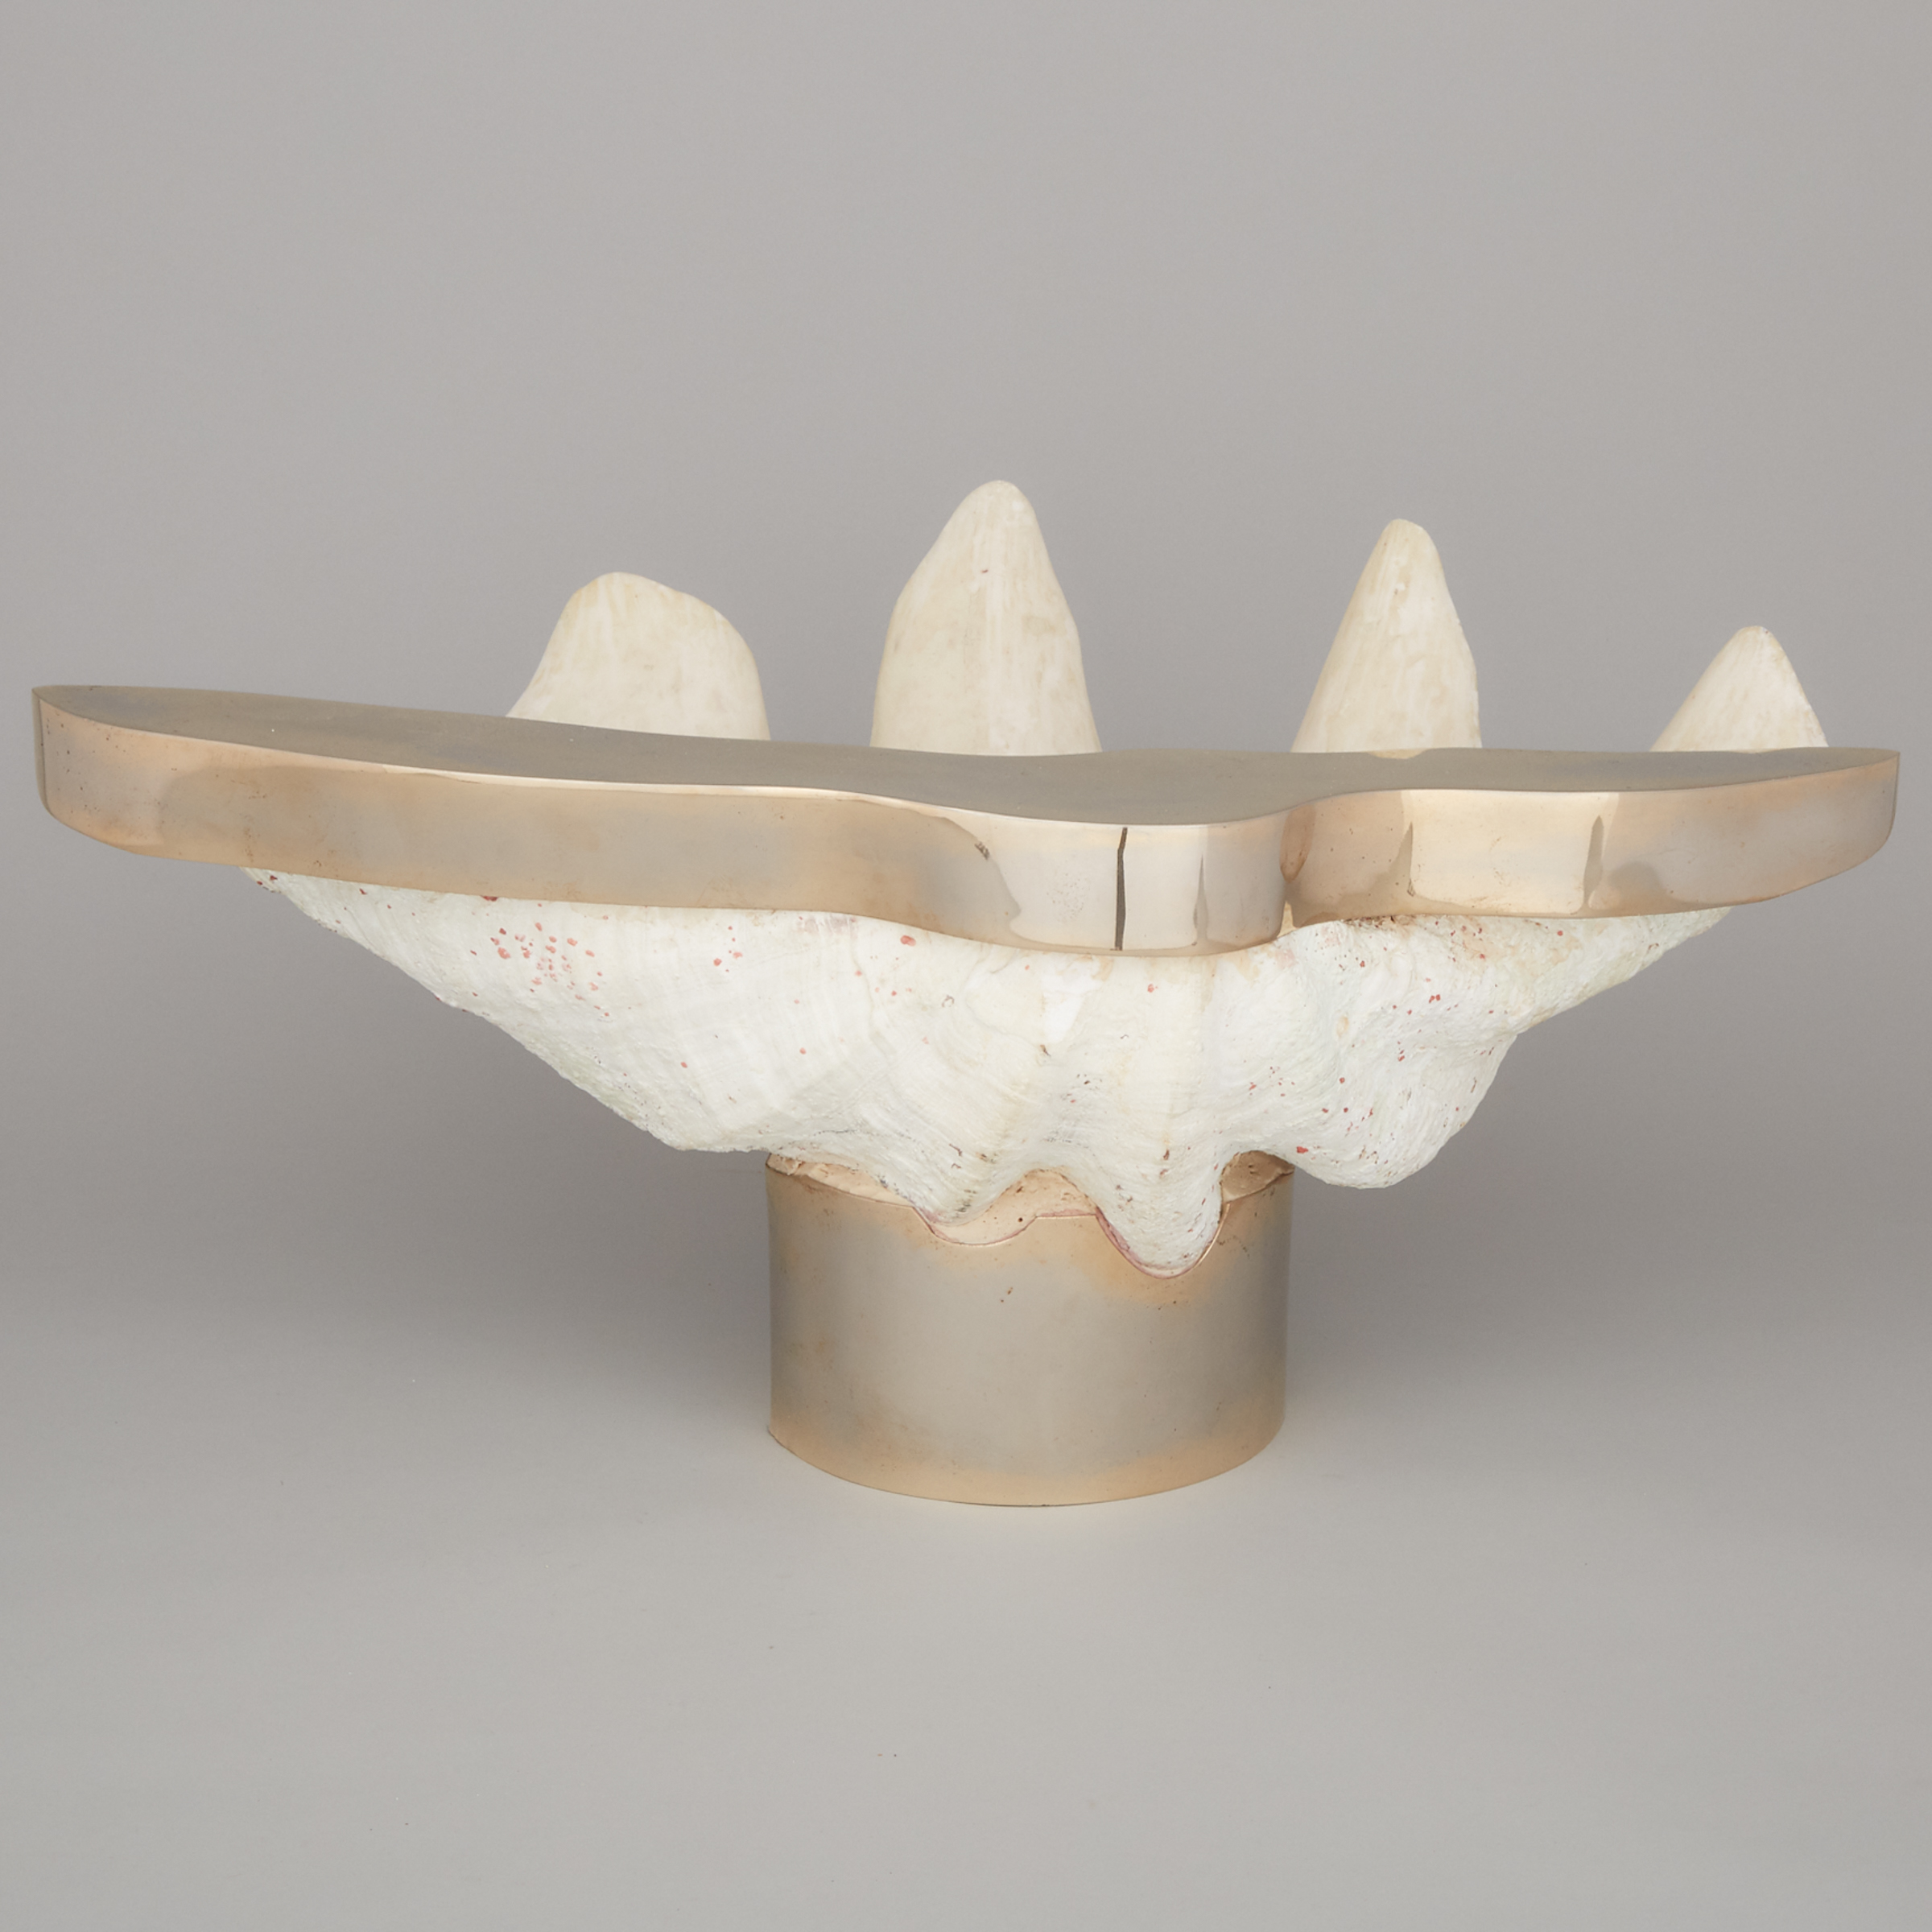 Large Bronze Mounted Clam Shell Bowl, mid 20th century